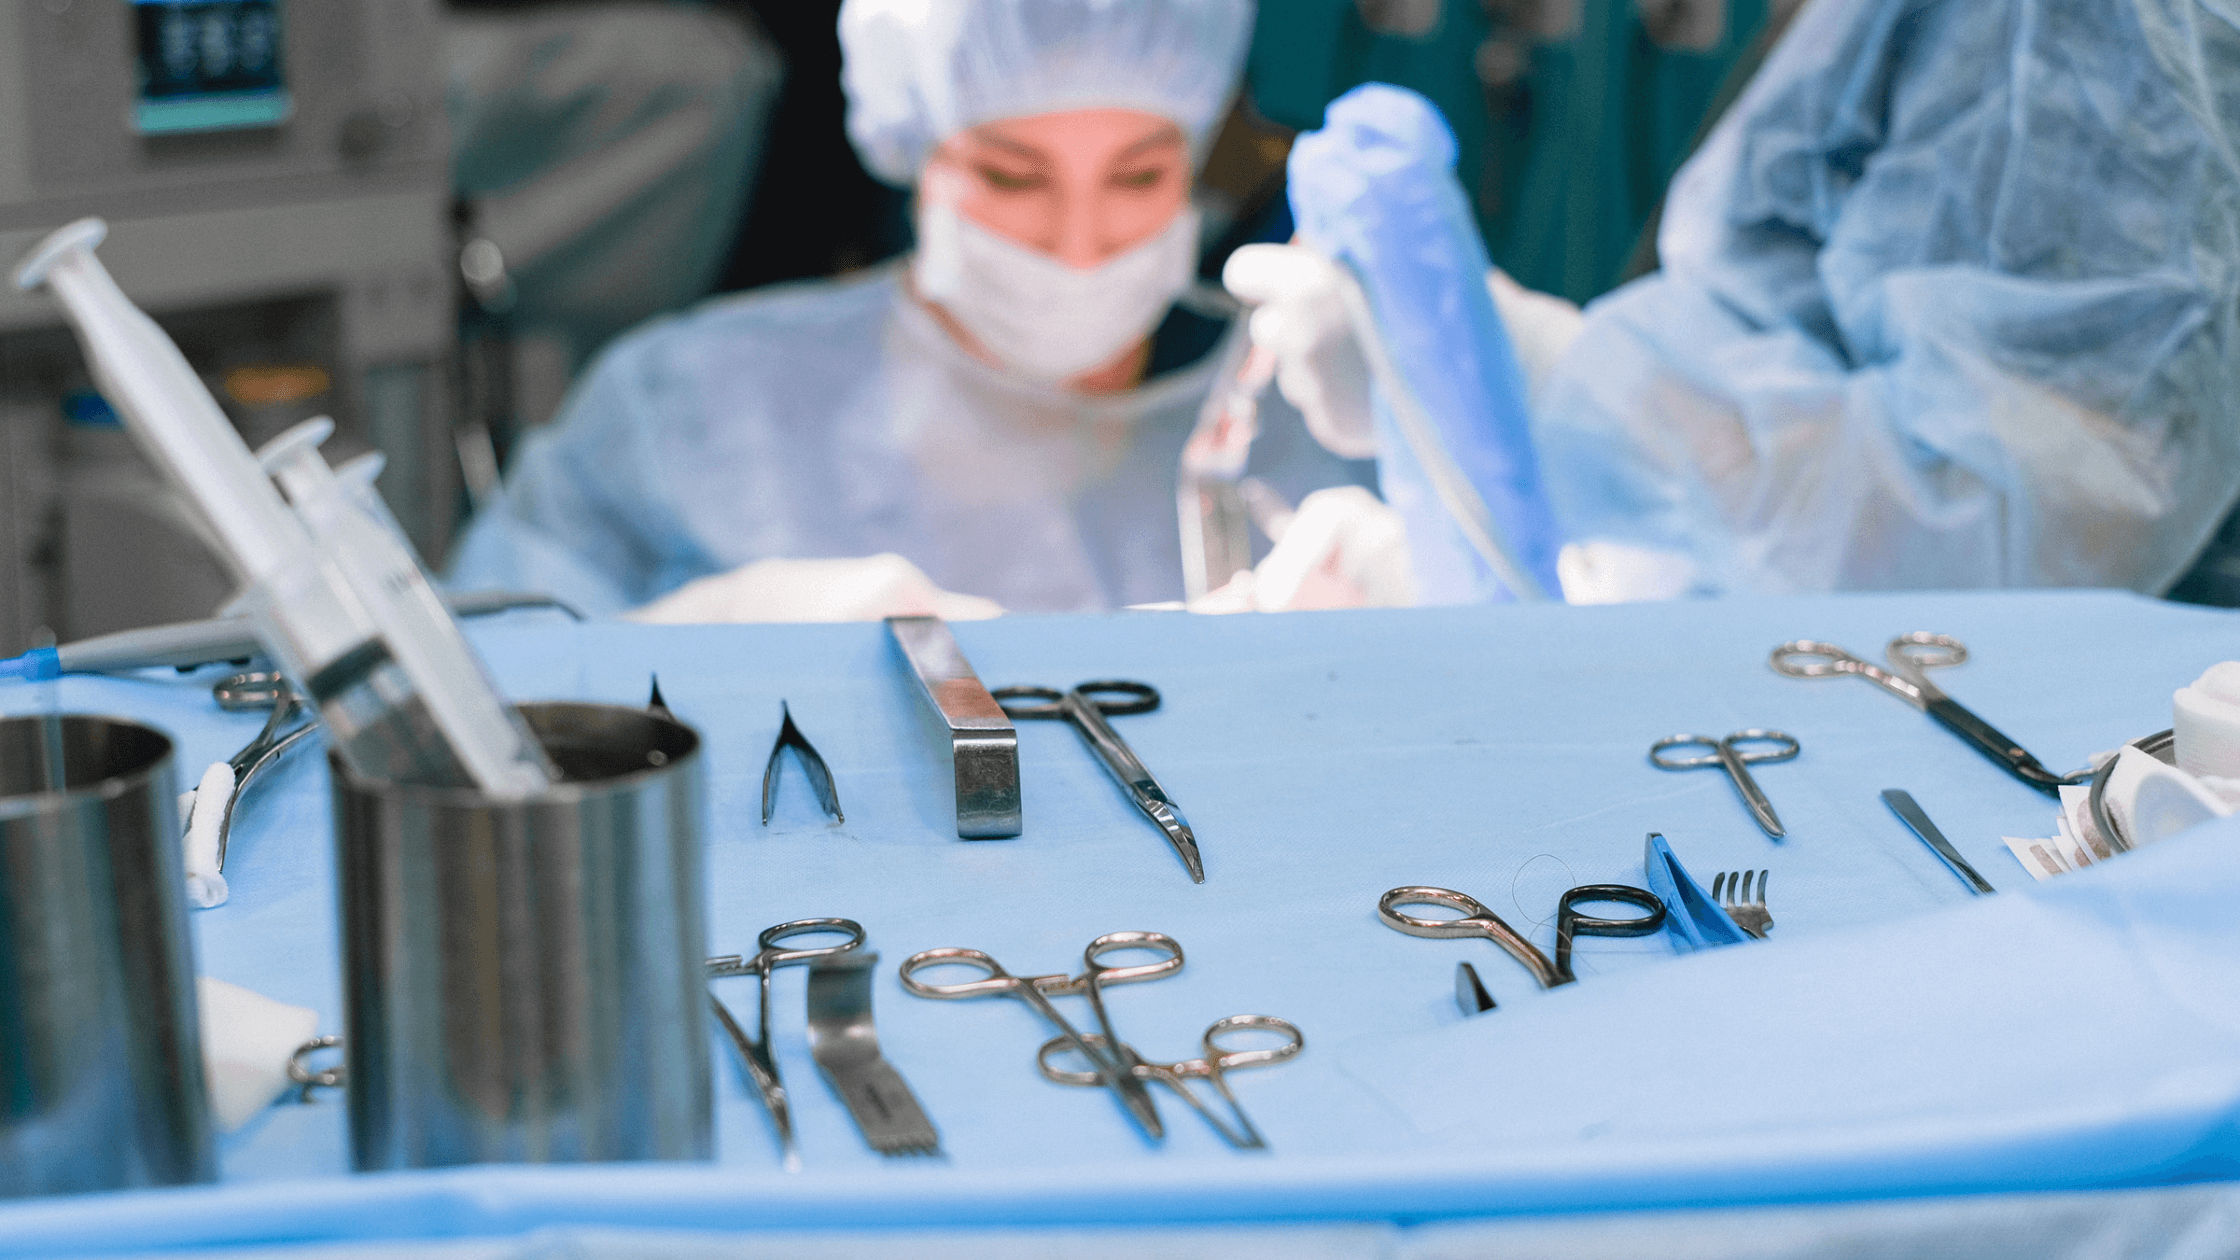 Conservative vs. Surgical Treatment: Pros and Cons